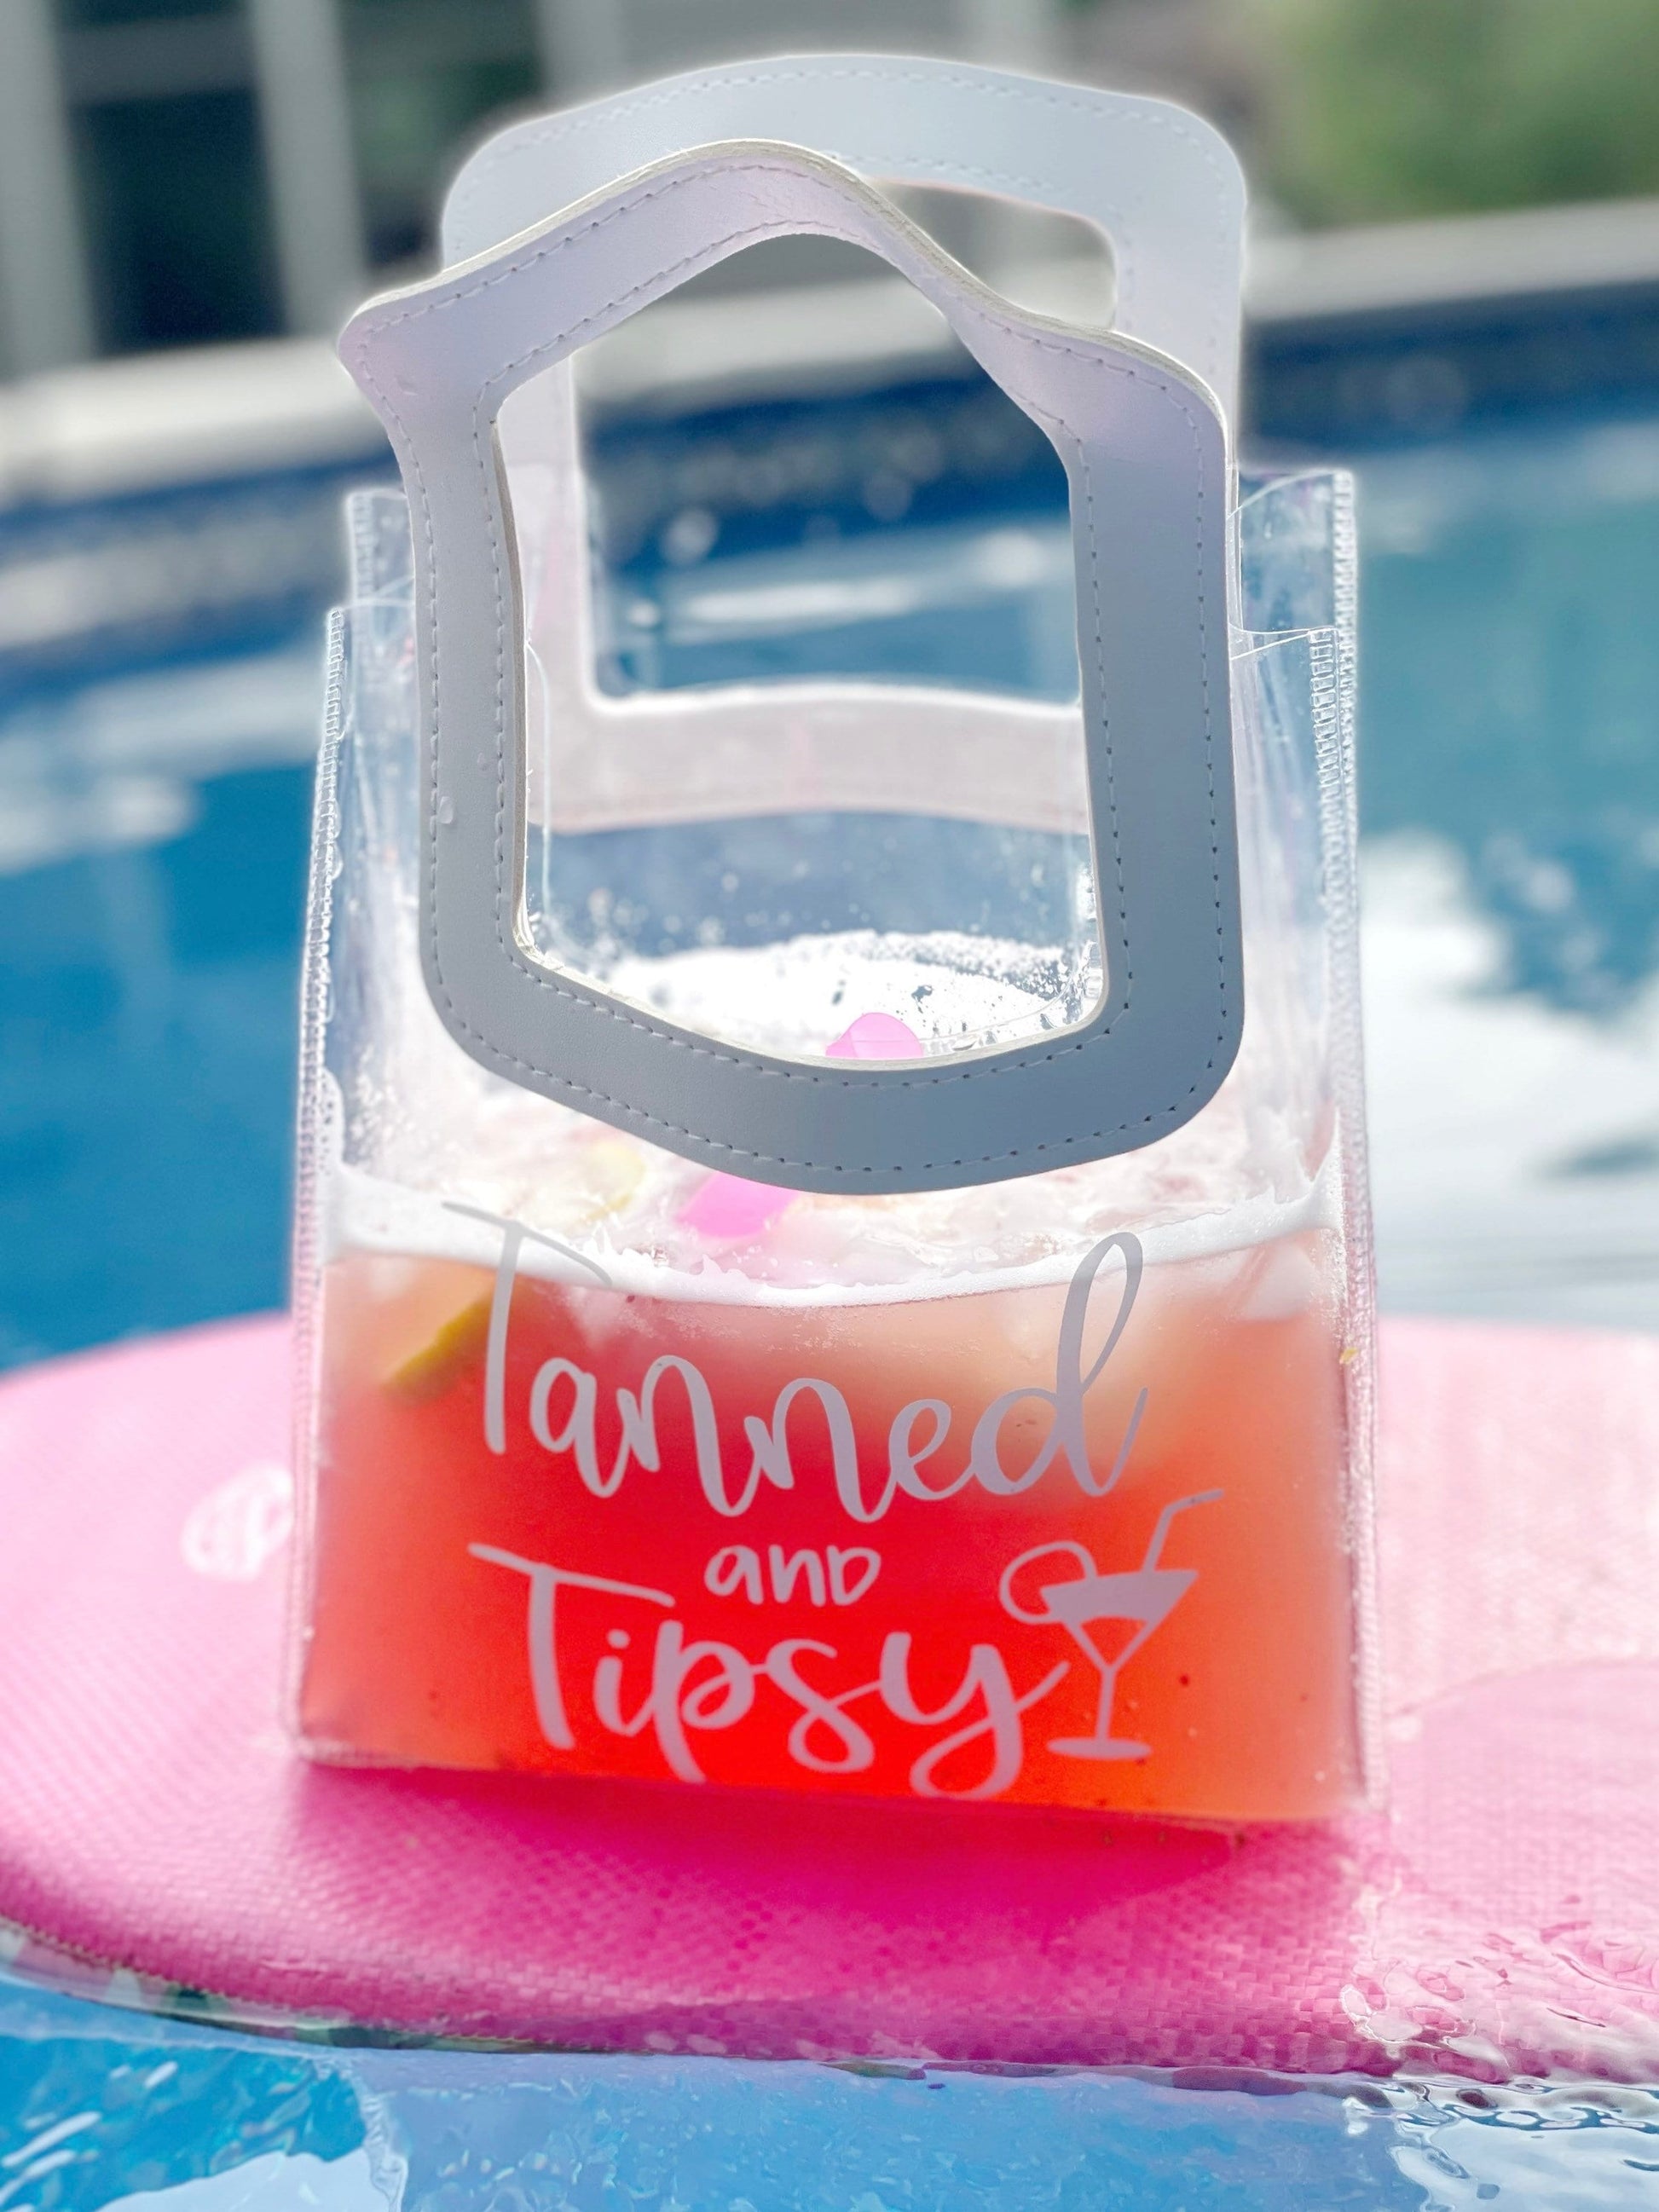 Tanned & Tipsy Gift For Girls Awesome Summer Trip Custom Style